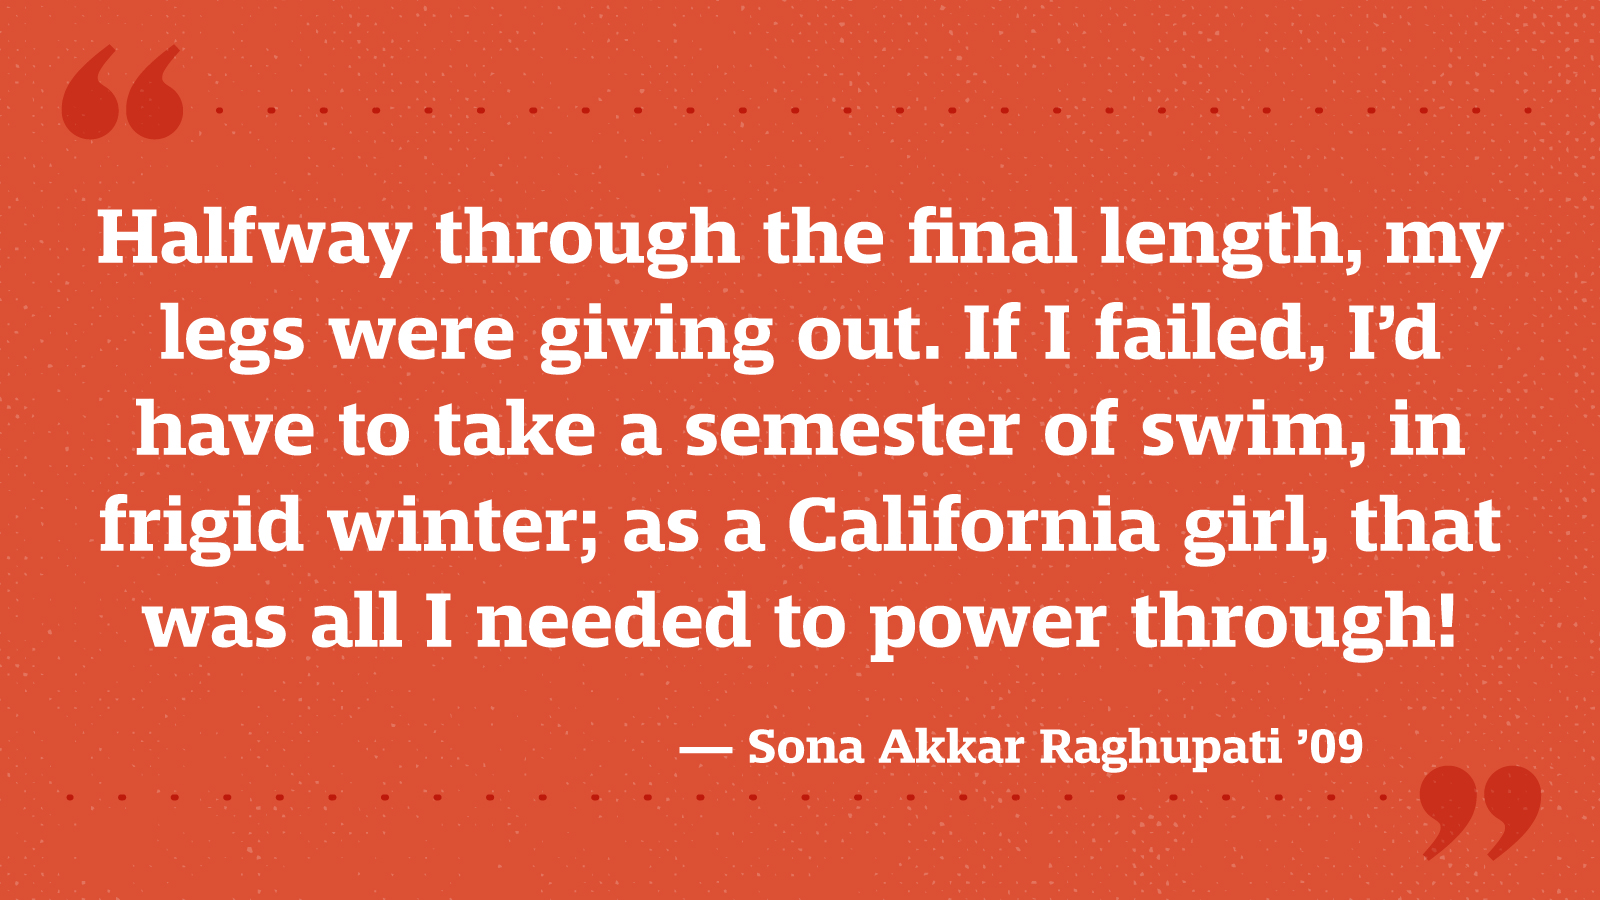 Halfway through the final length, my legs were giving out. If I failed, I’d have to take a semester of swim, in frigid winter; as a California girl, that was all I needed to power through! — Sona Akkar Raghupati ’09